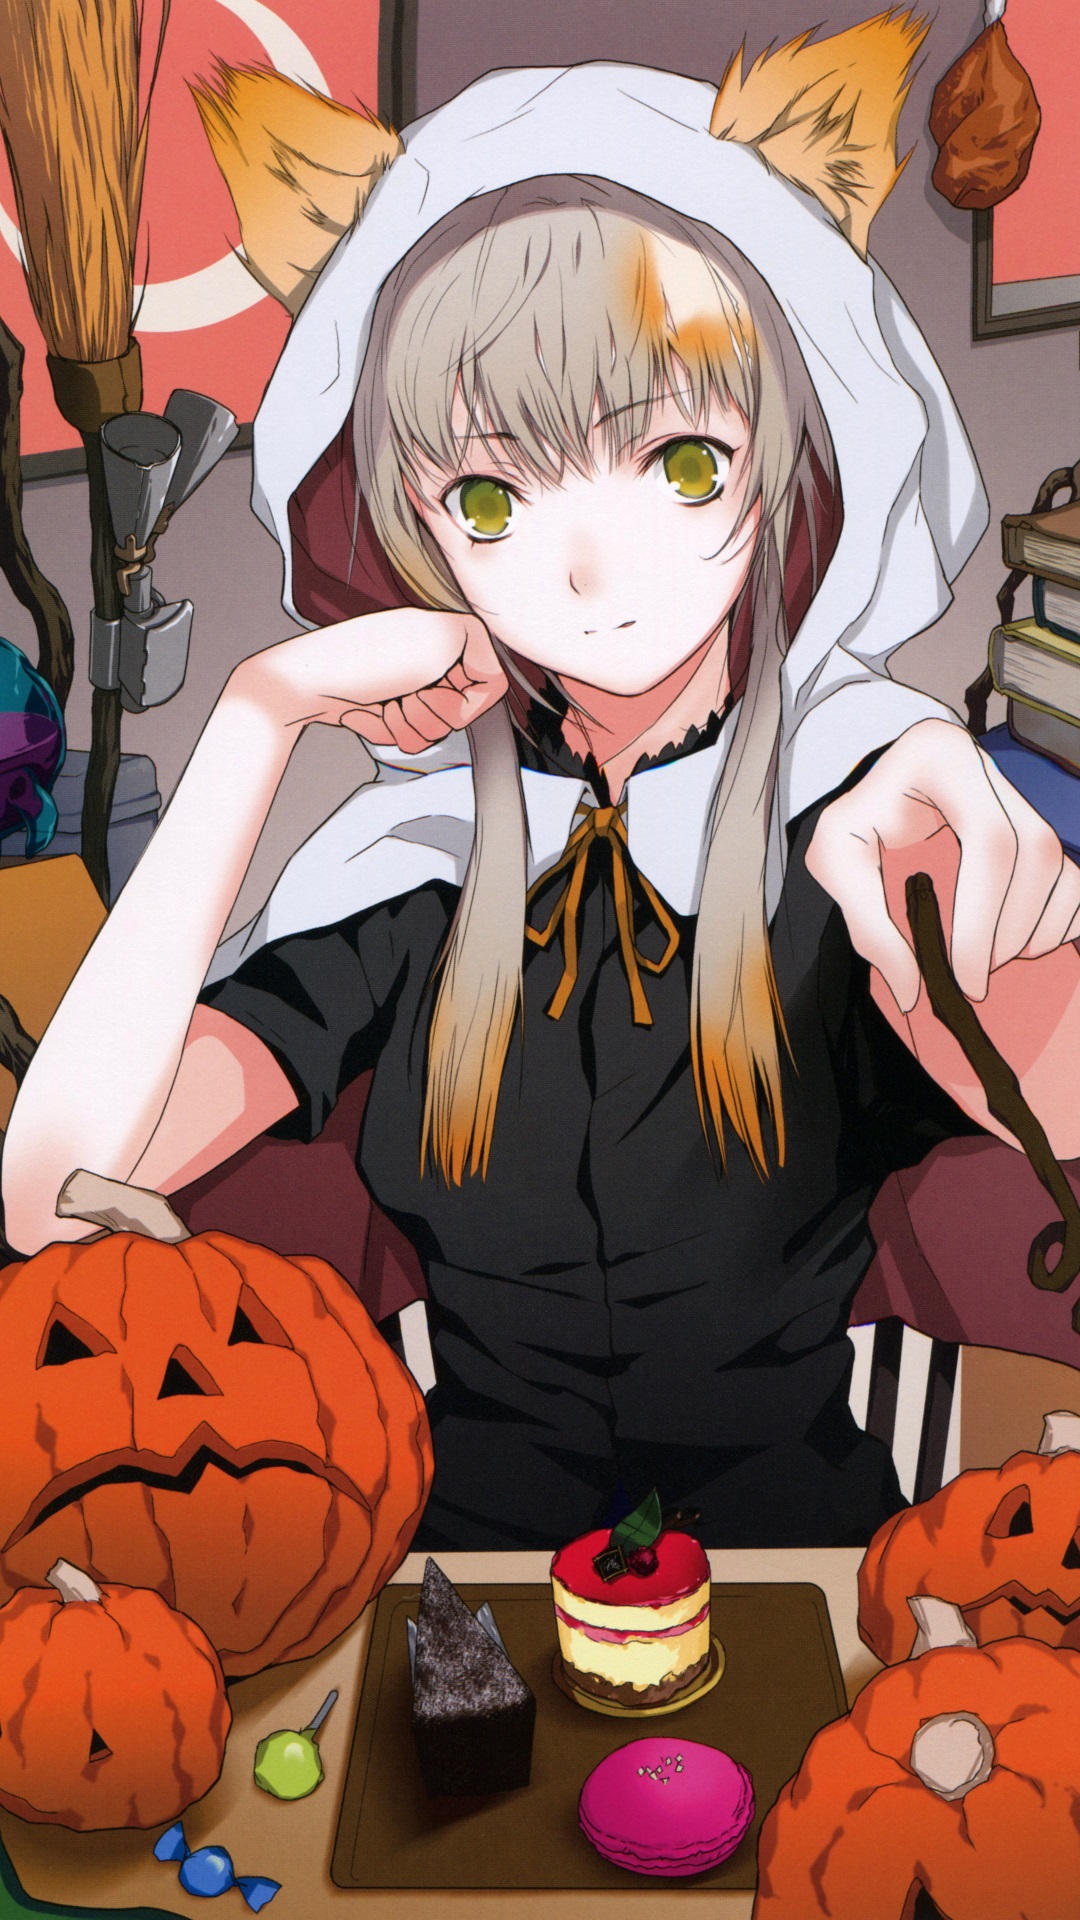 Download wallpaper 938x1668 girl, witch, hat, pumpkin, halloween, anime  iphone 8/7/6s/6 for parallax hd background